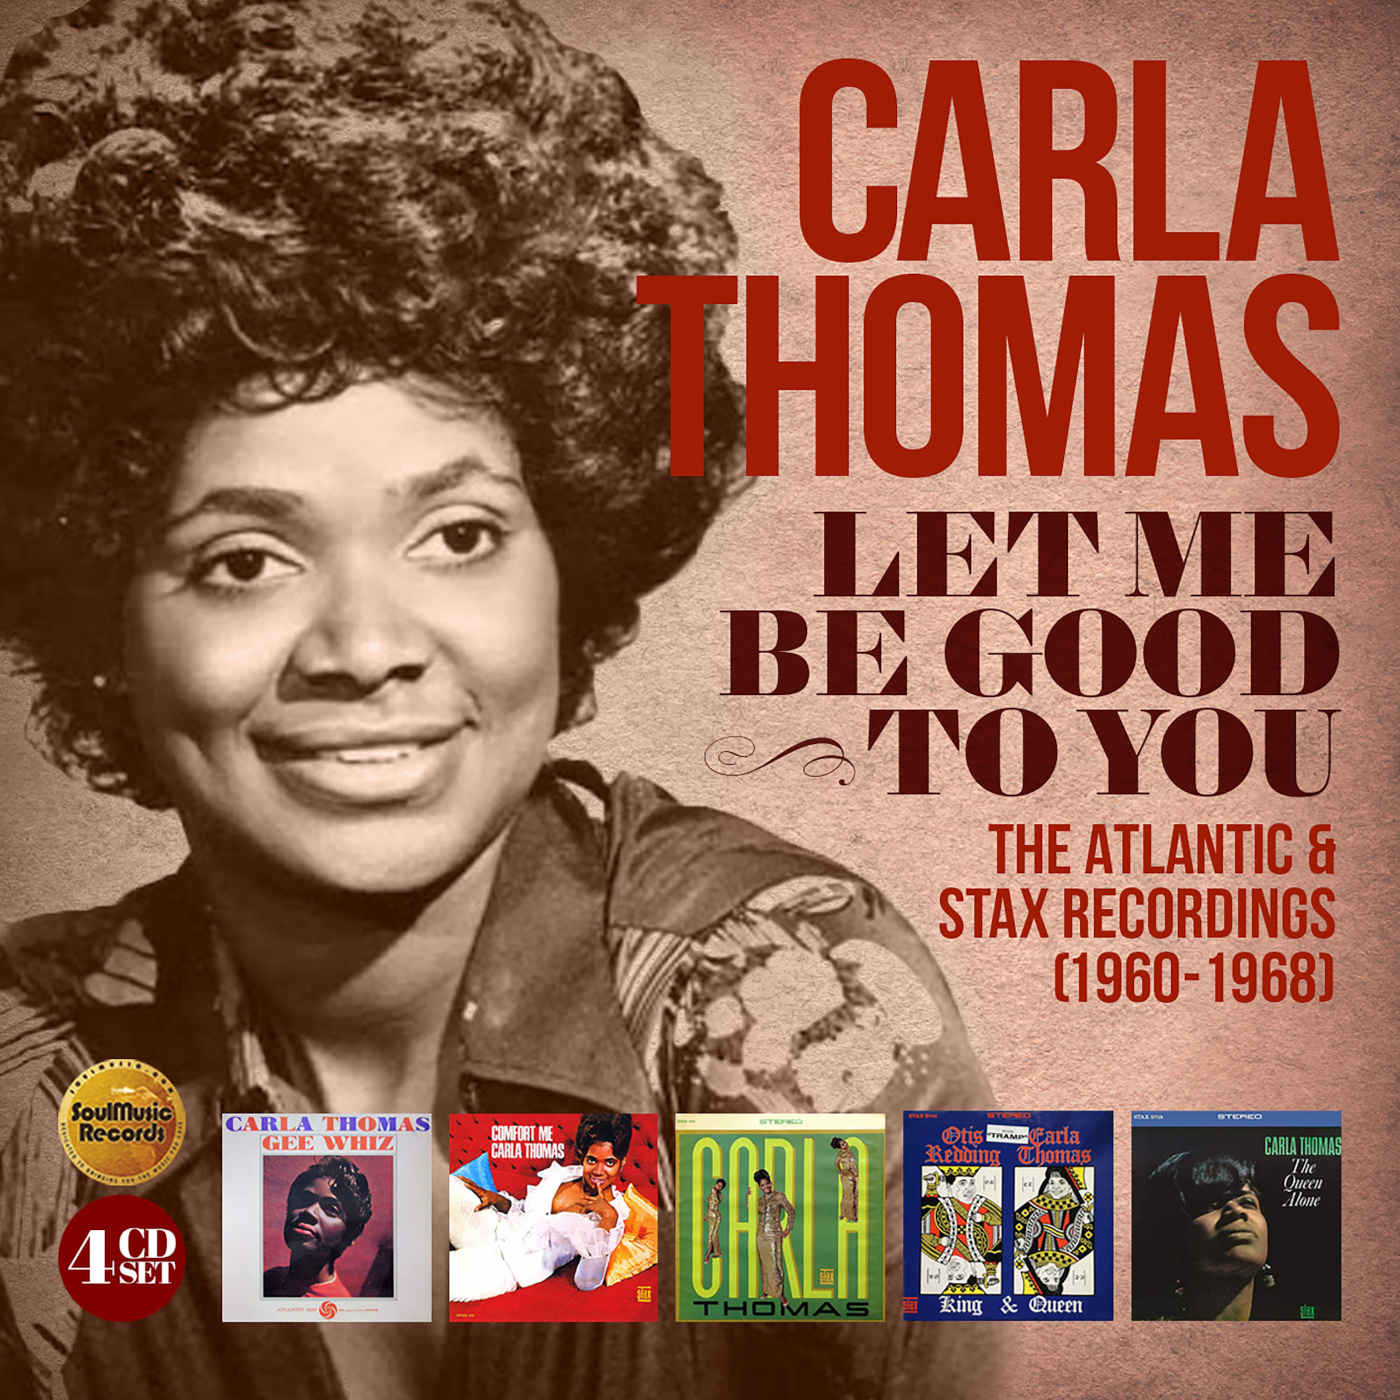 4CD - Carla Thomas: Let Me Be Good To You – The Atlantic & Stax Recordings (1960-1968)